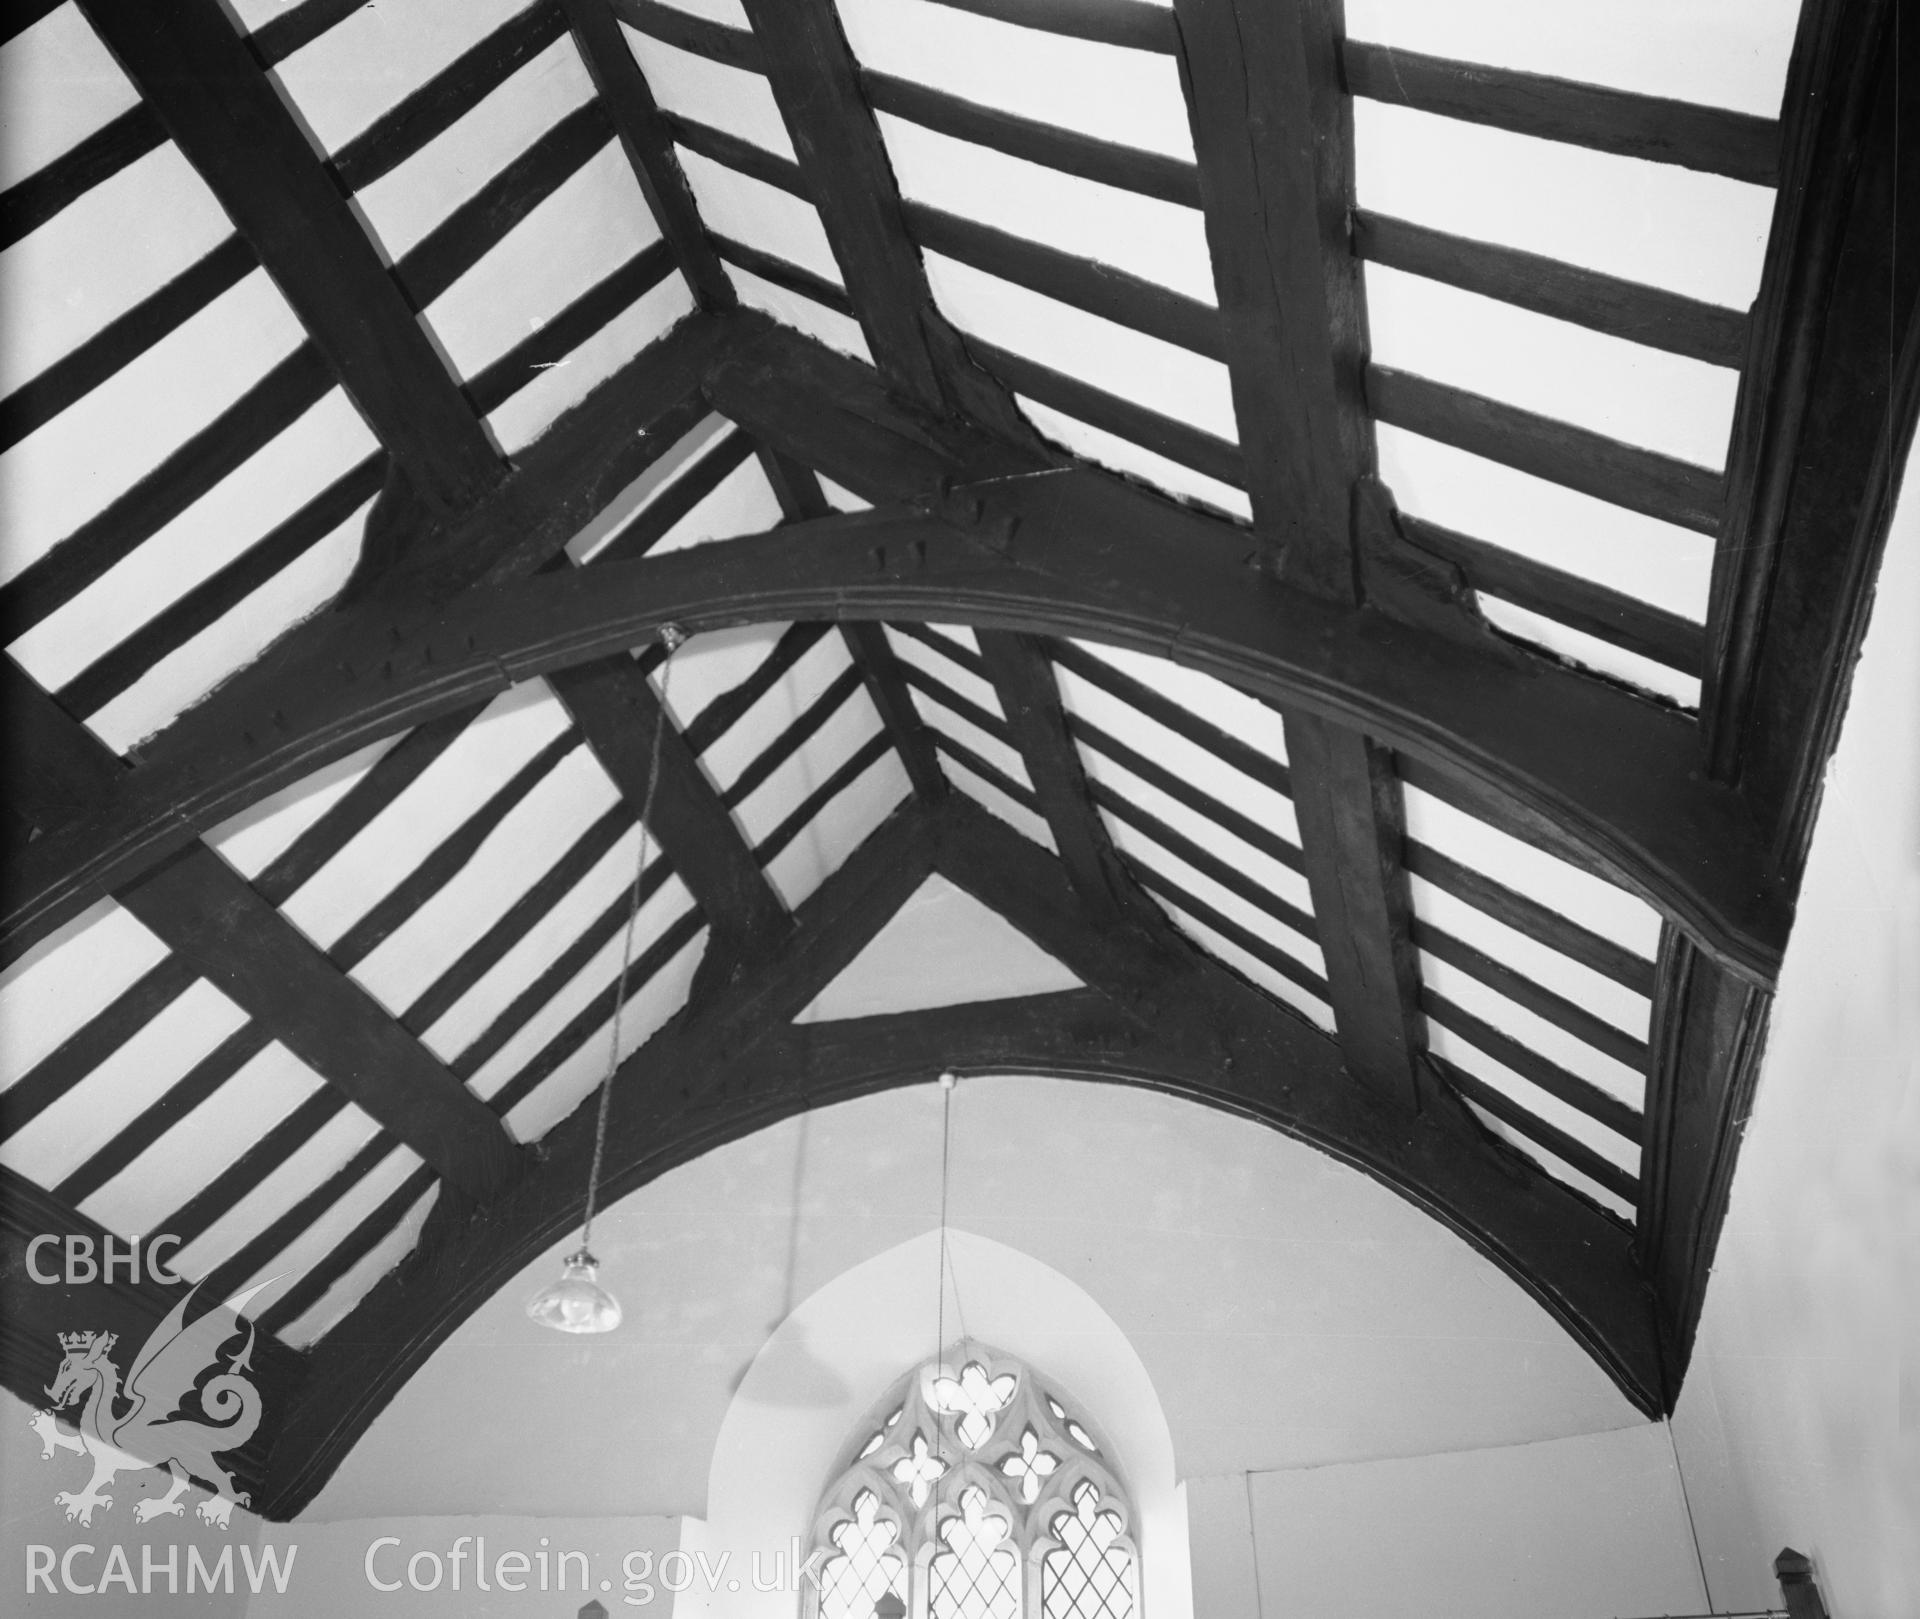 Interior view of roof at St Benedicts Church, Gyffin taken 30.09.48.